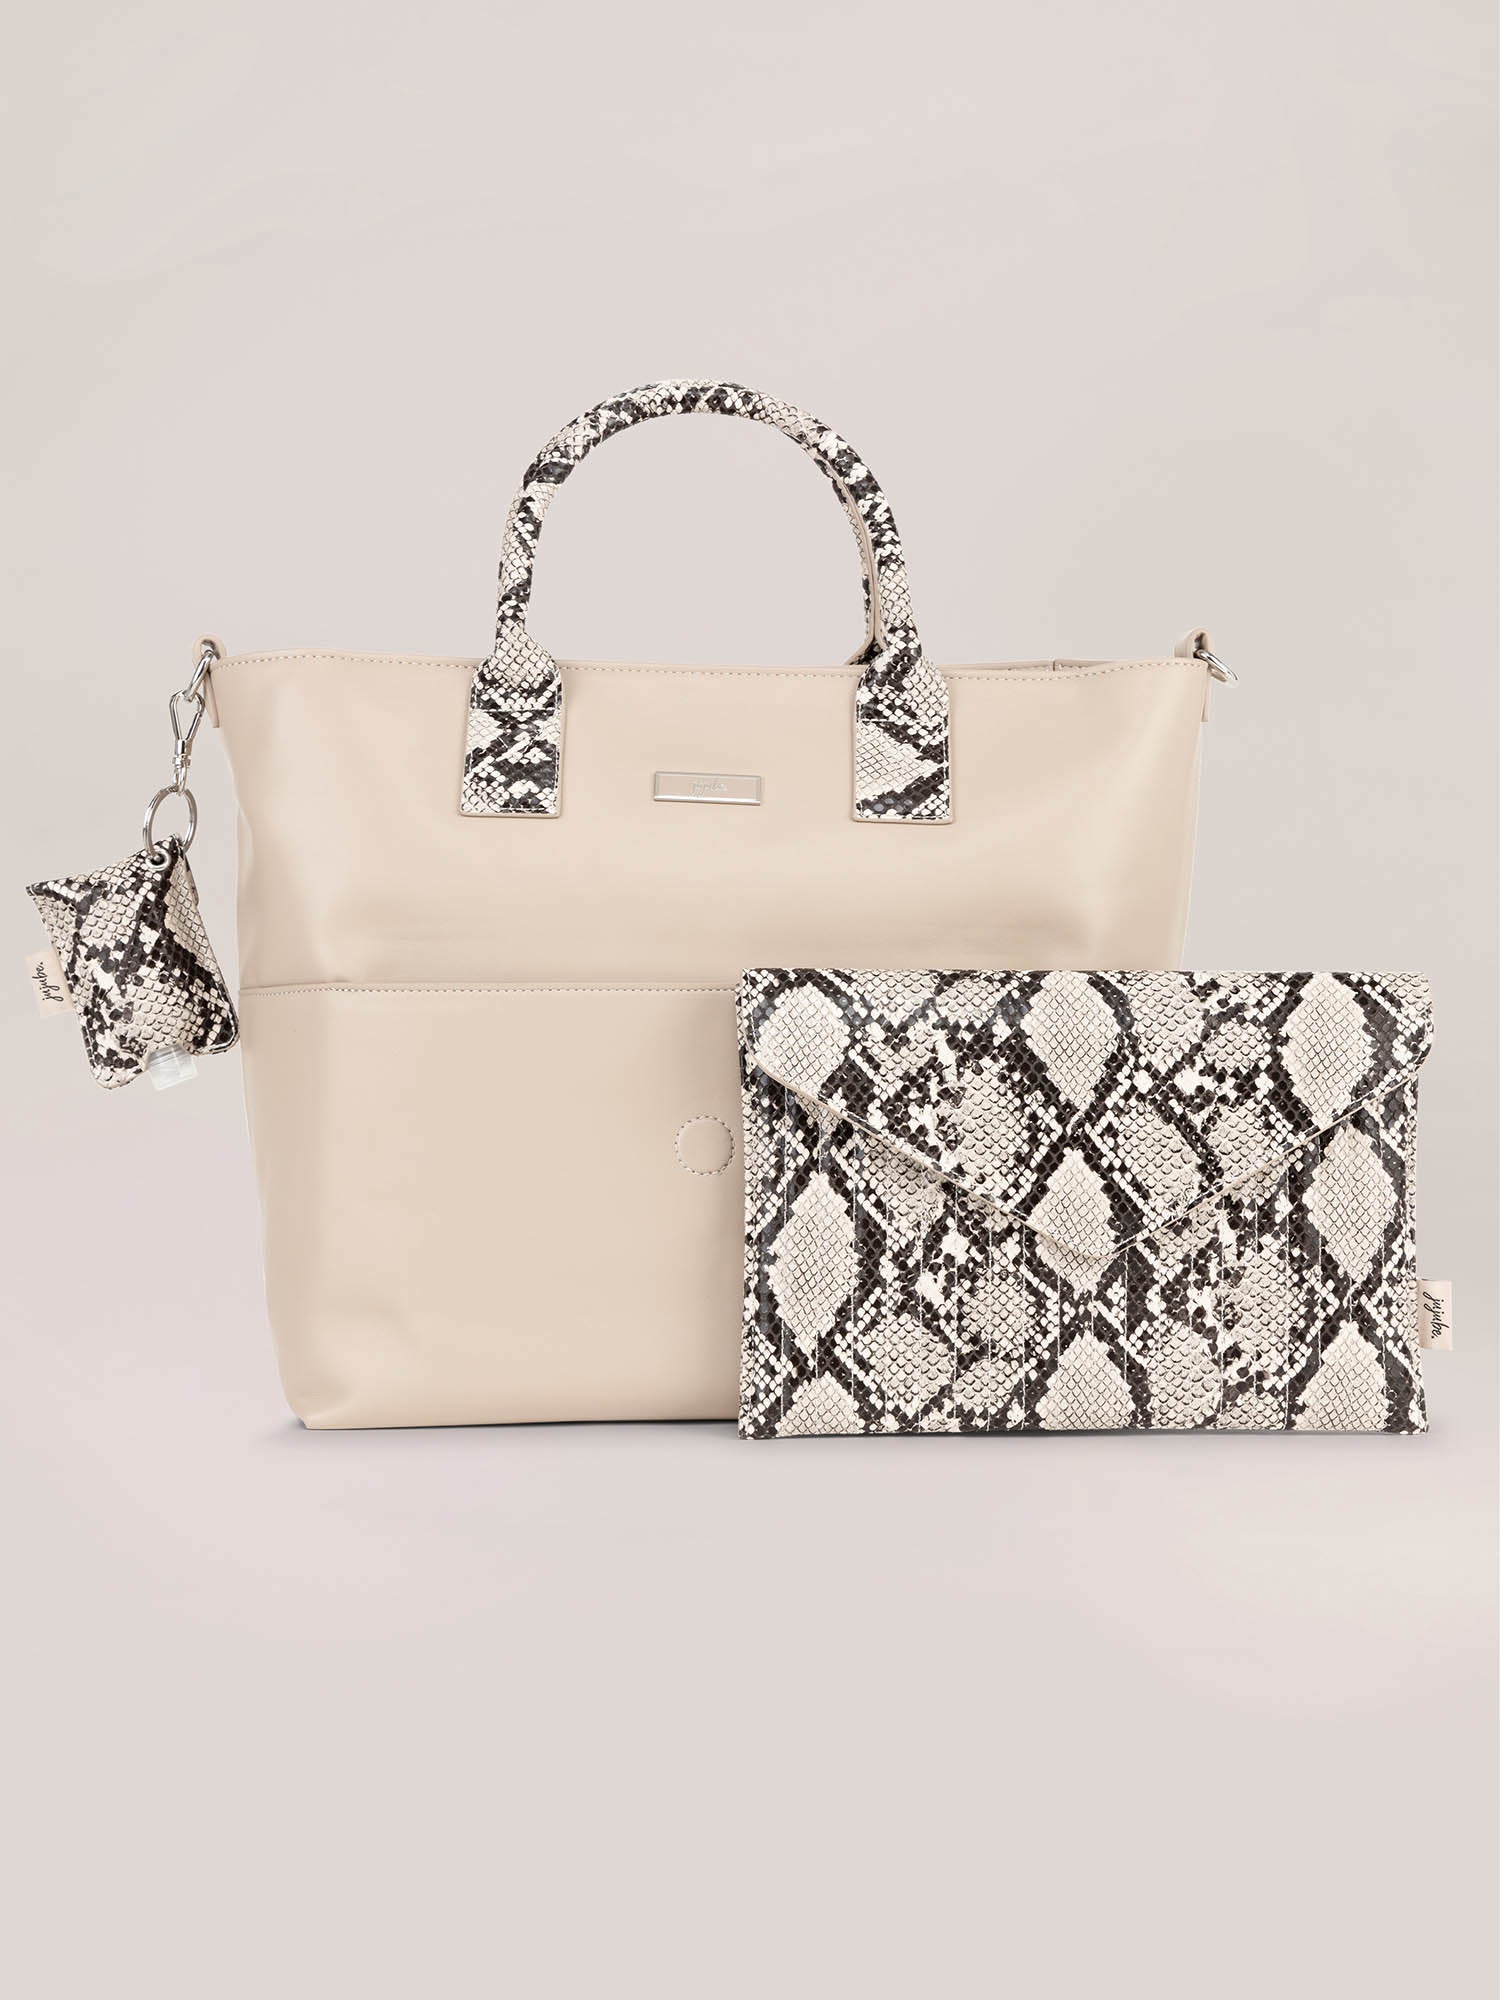 24-7 Tote - Taupe with upSCALE